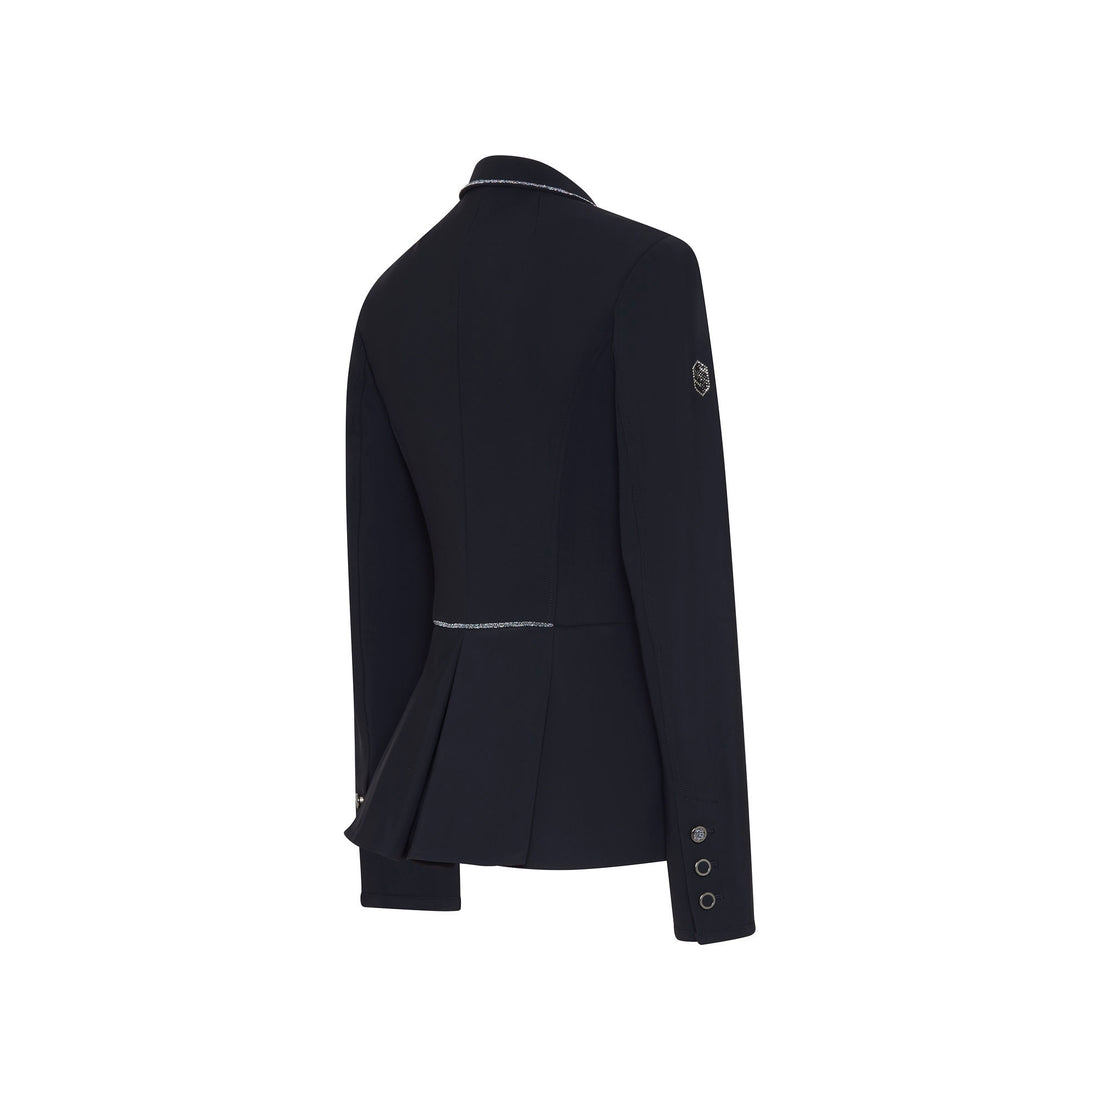 The Samshield Victorine Navy Crystal Fabric jacket pairs breathable, high stretch fabric with an incredibly flattering design thanks to the long fan finish on the reverse and shorter cut at the front, allowing the rider to feel and perform at their best.